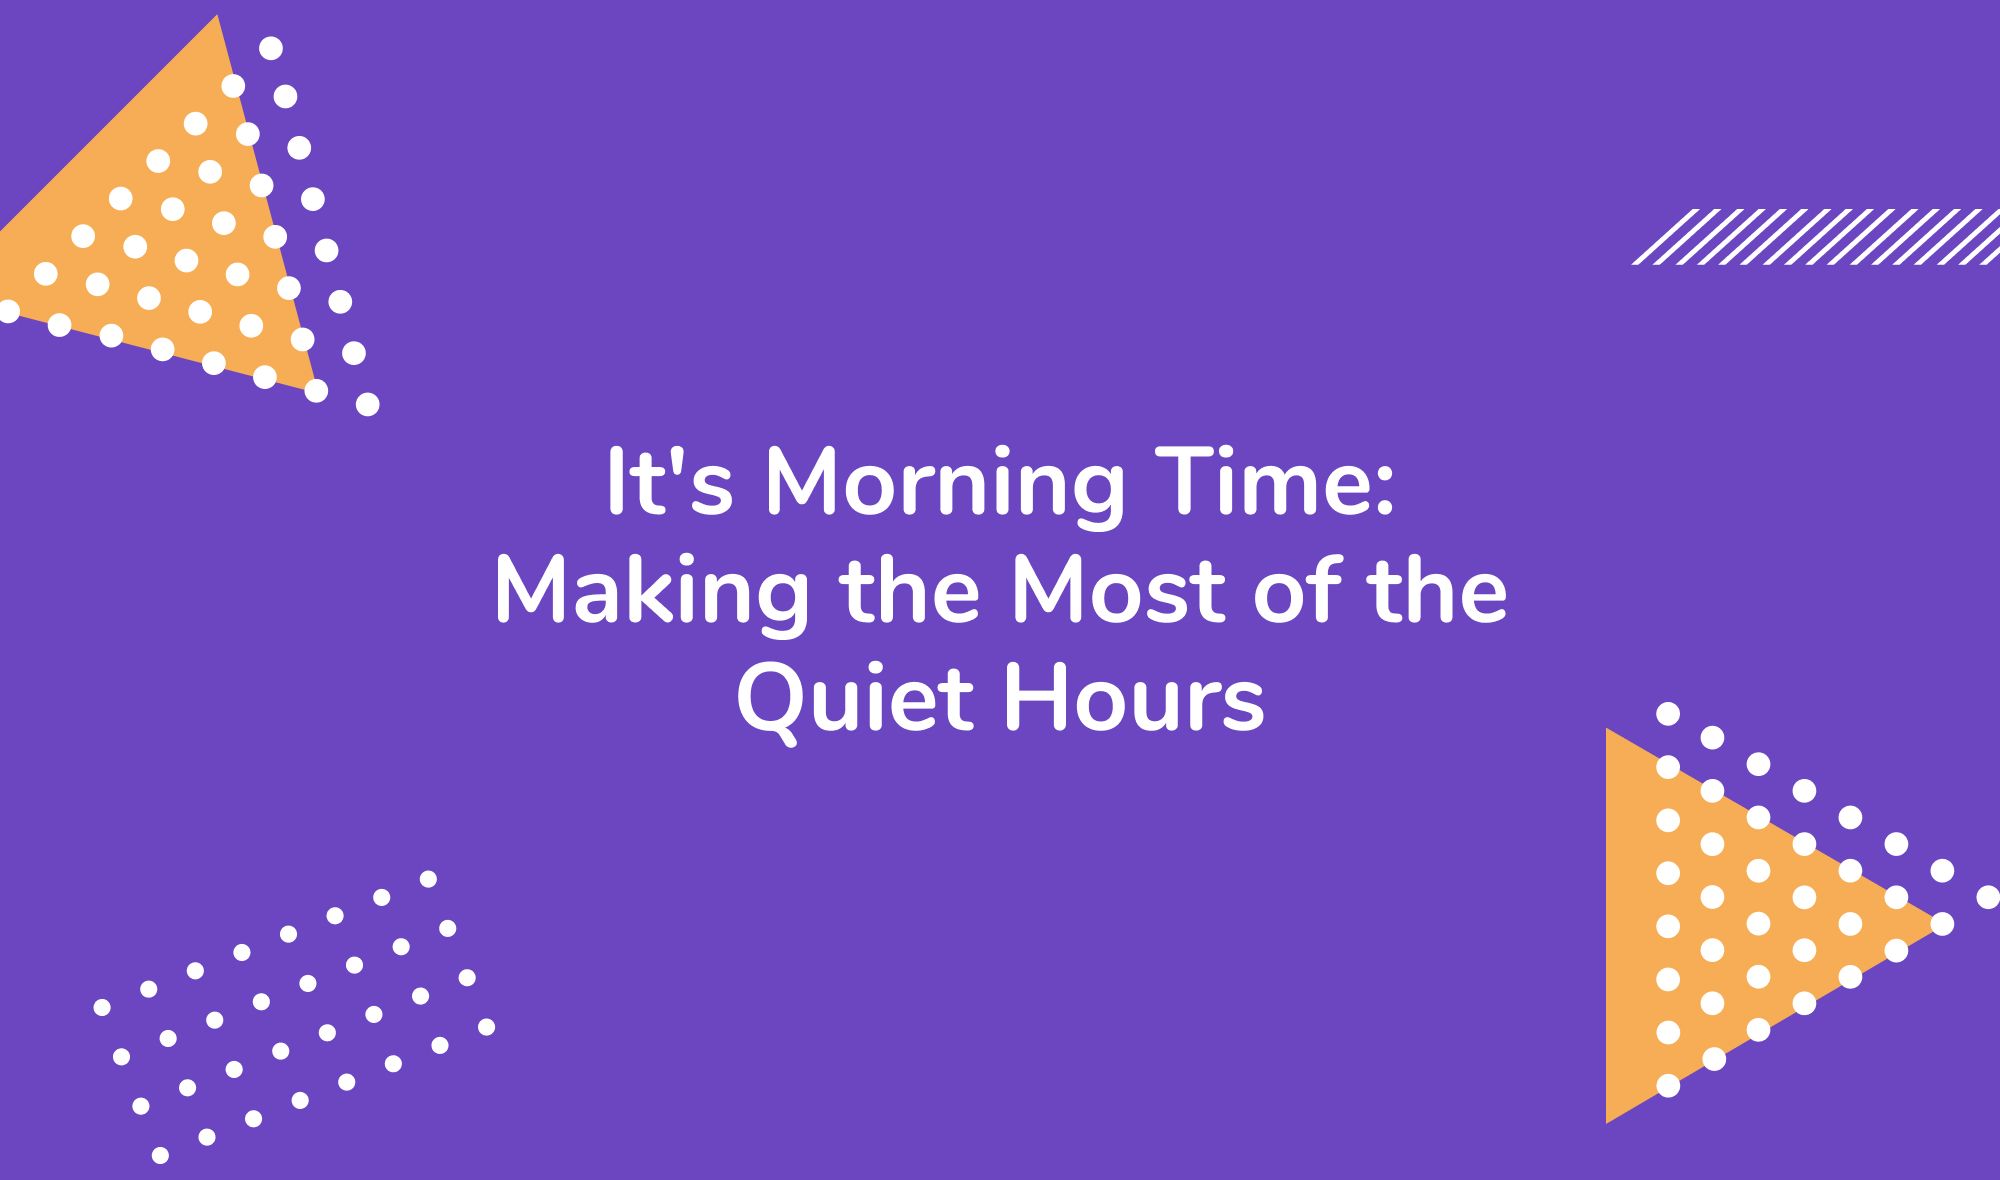 It's Morning Time: Making the Most of the Quiet Hours